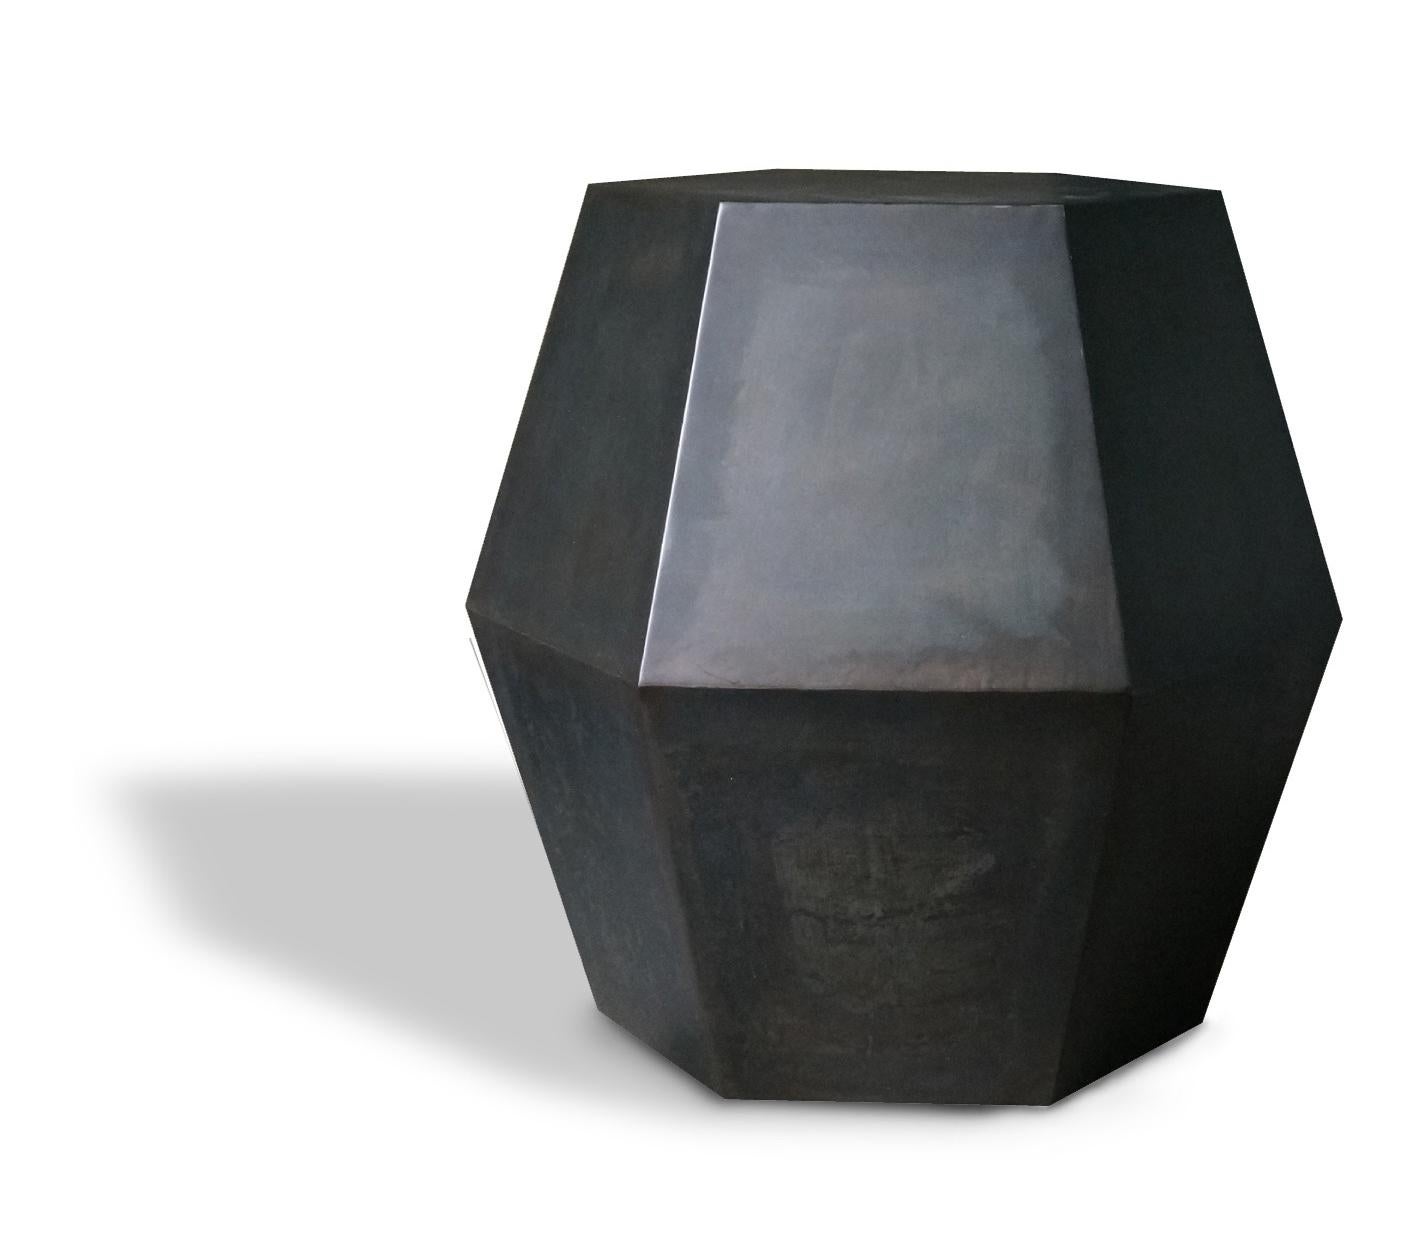 Hex Modern Side Table in Steel from Costantini, Tamino

Measurements are 17